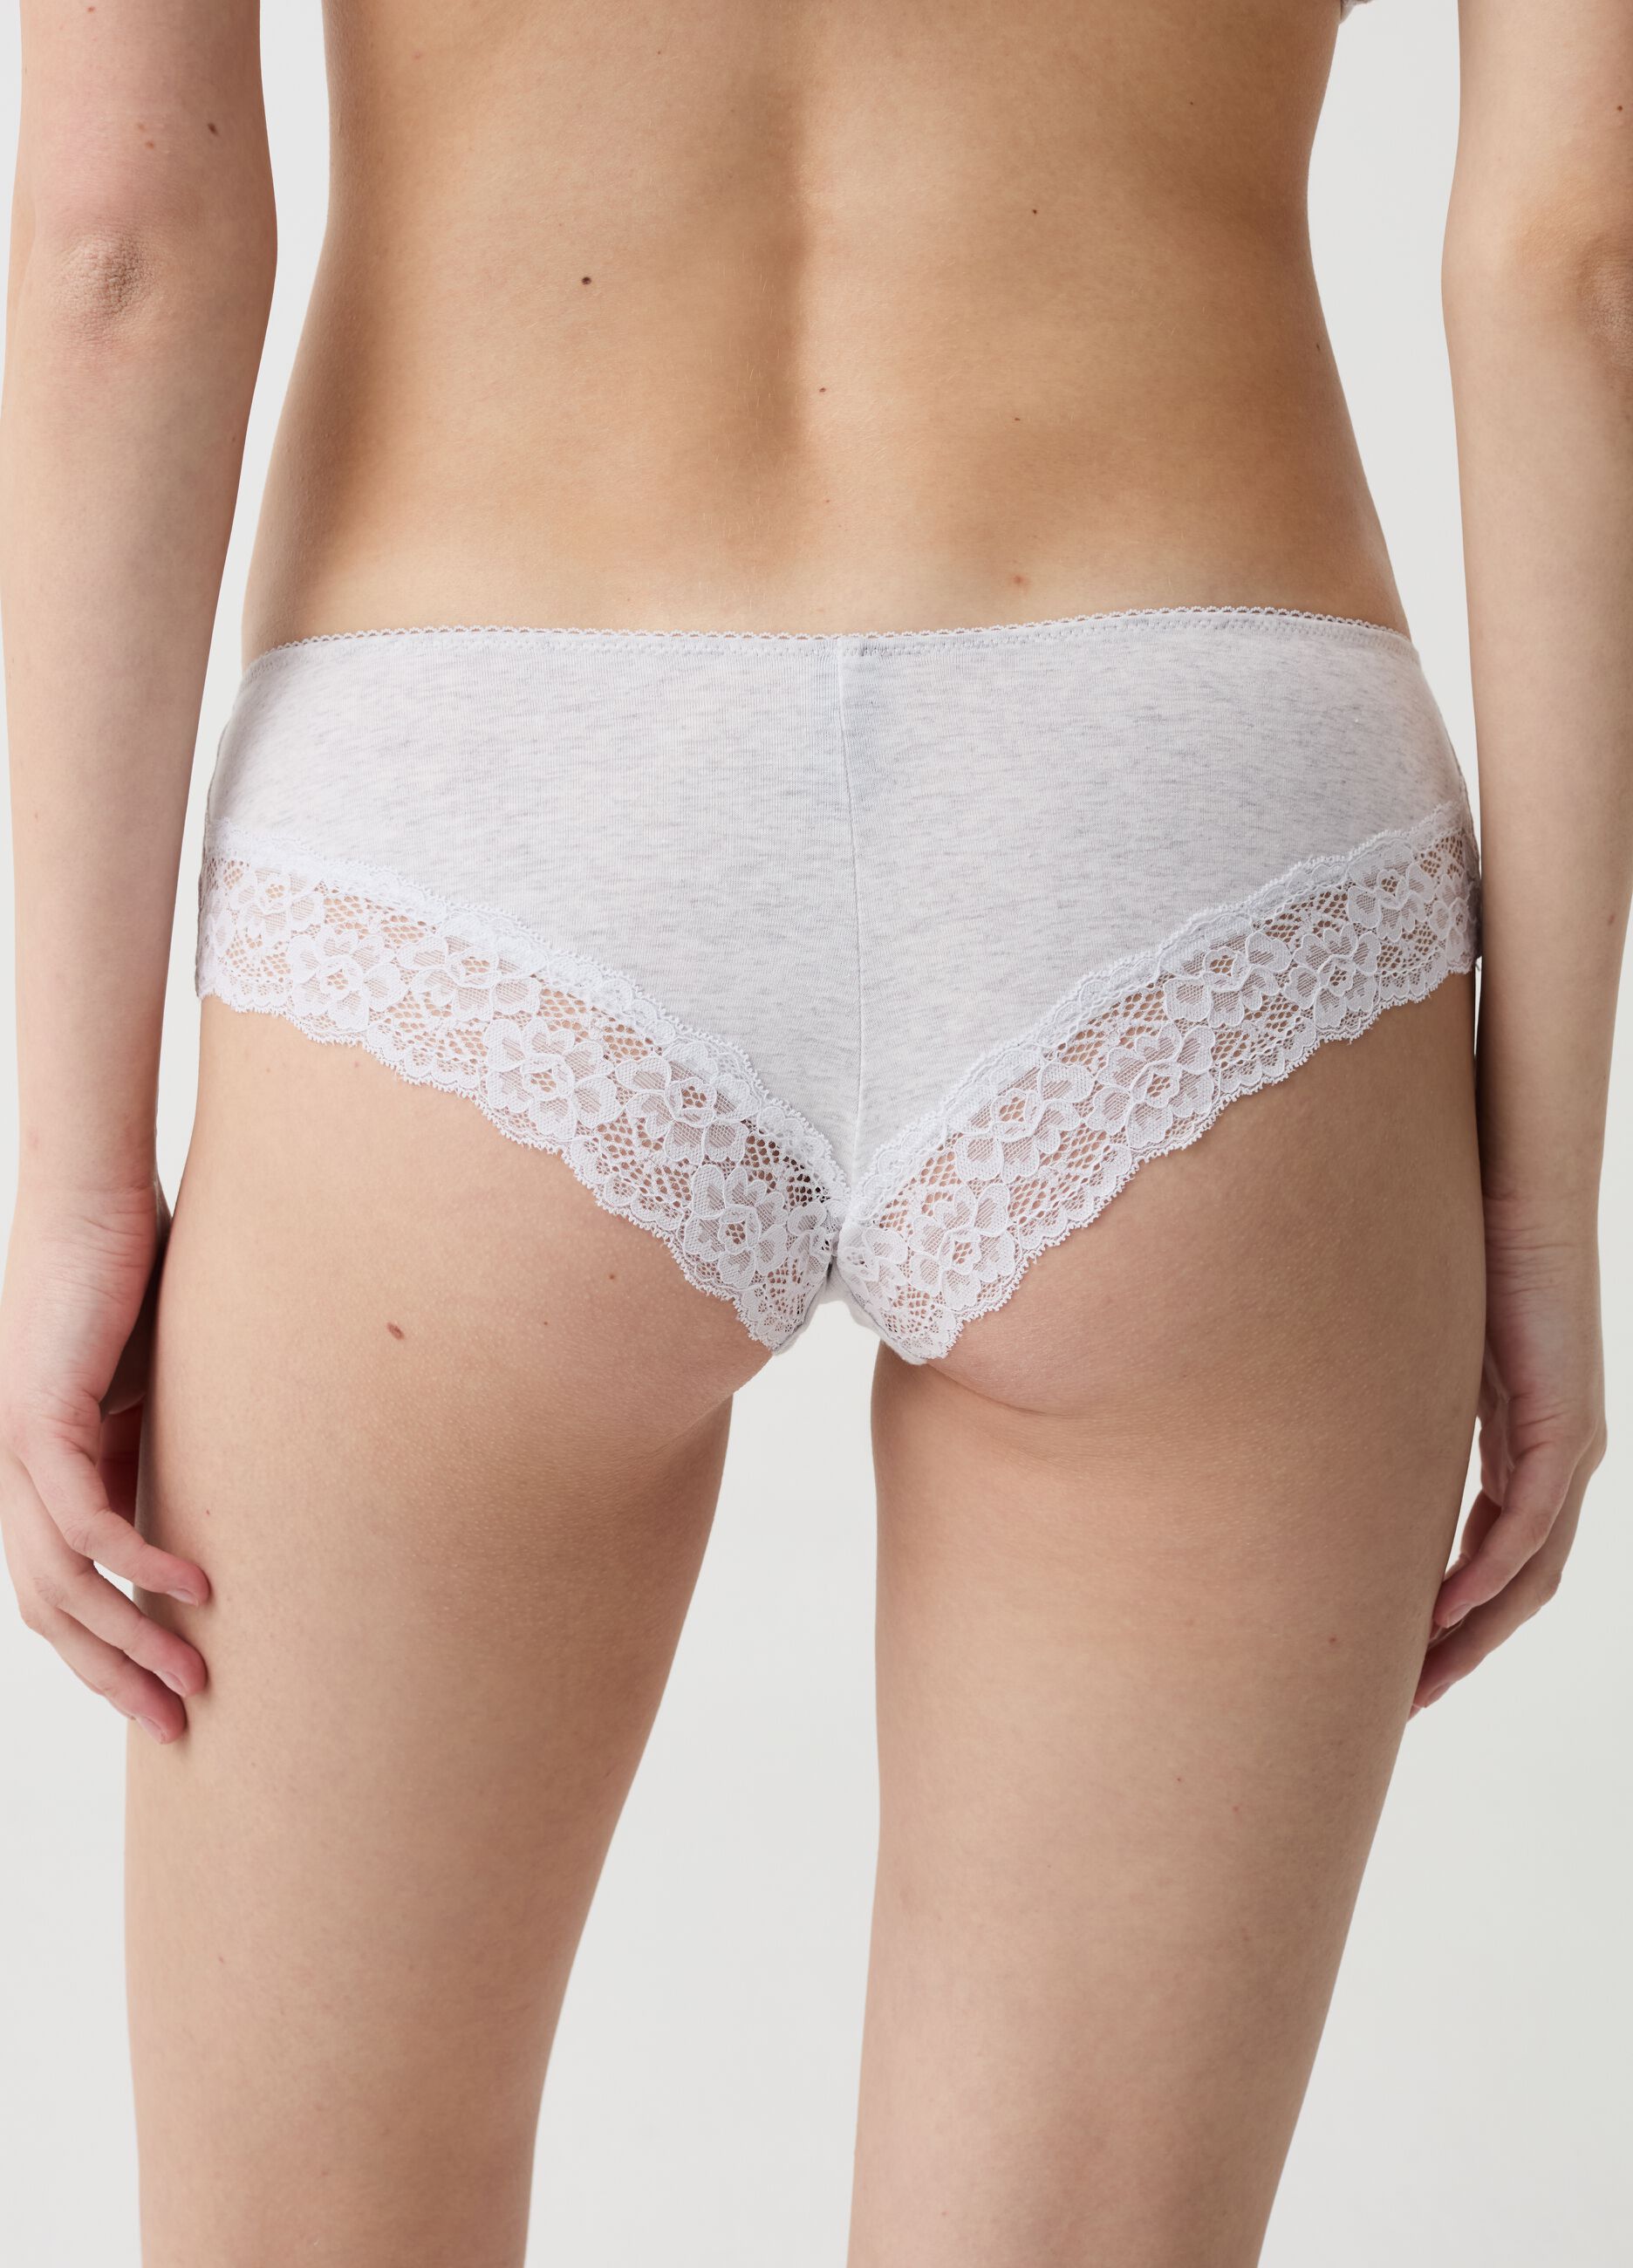 Mélange French knickers with lace edge